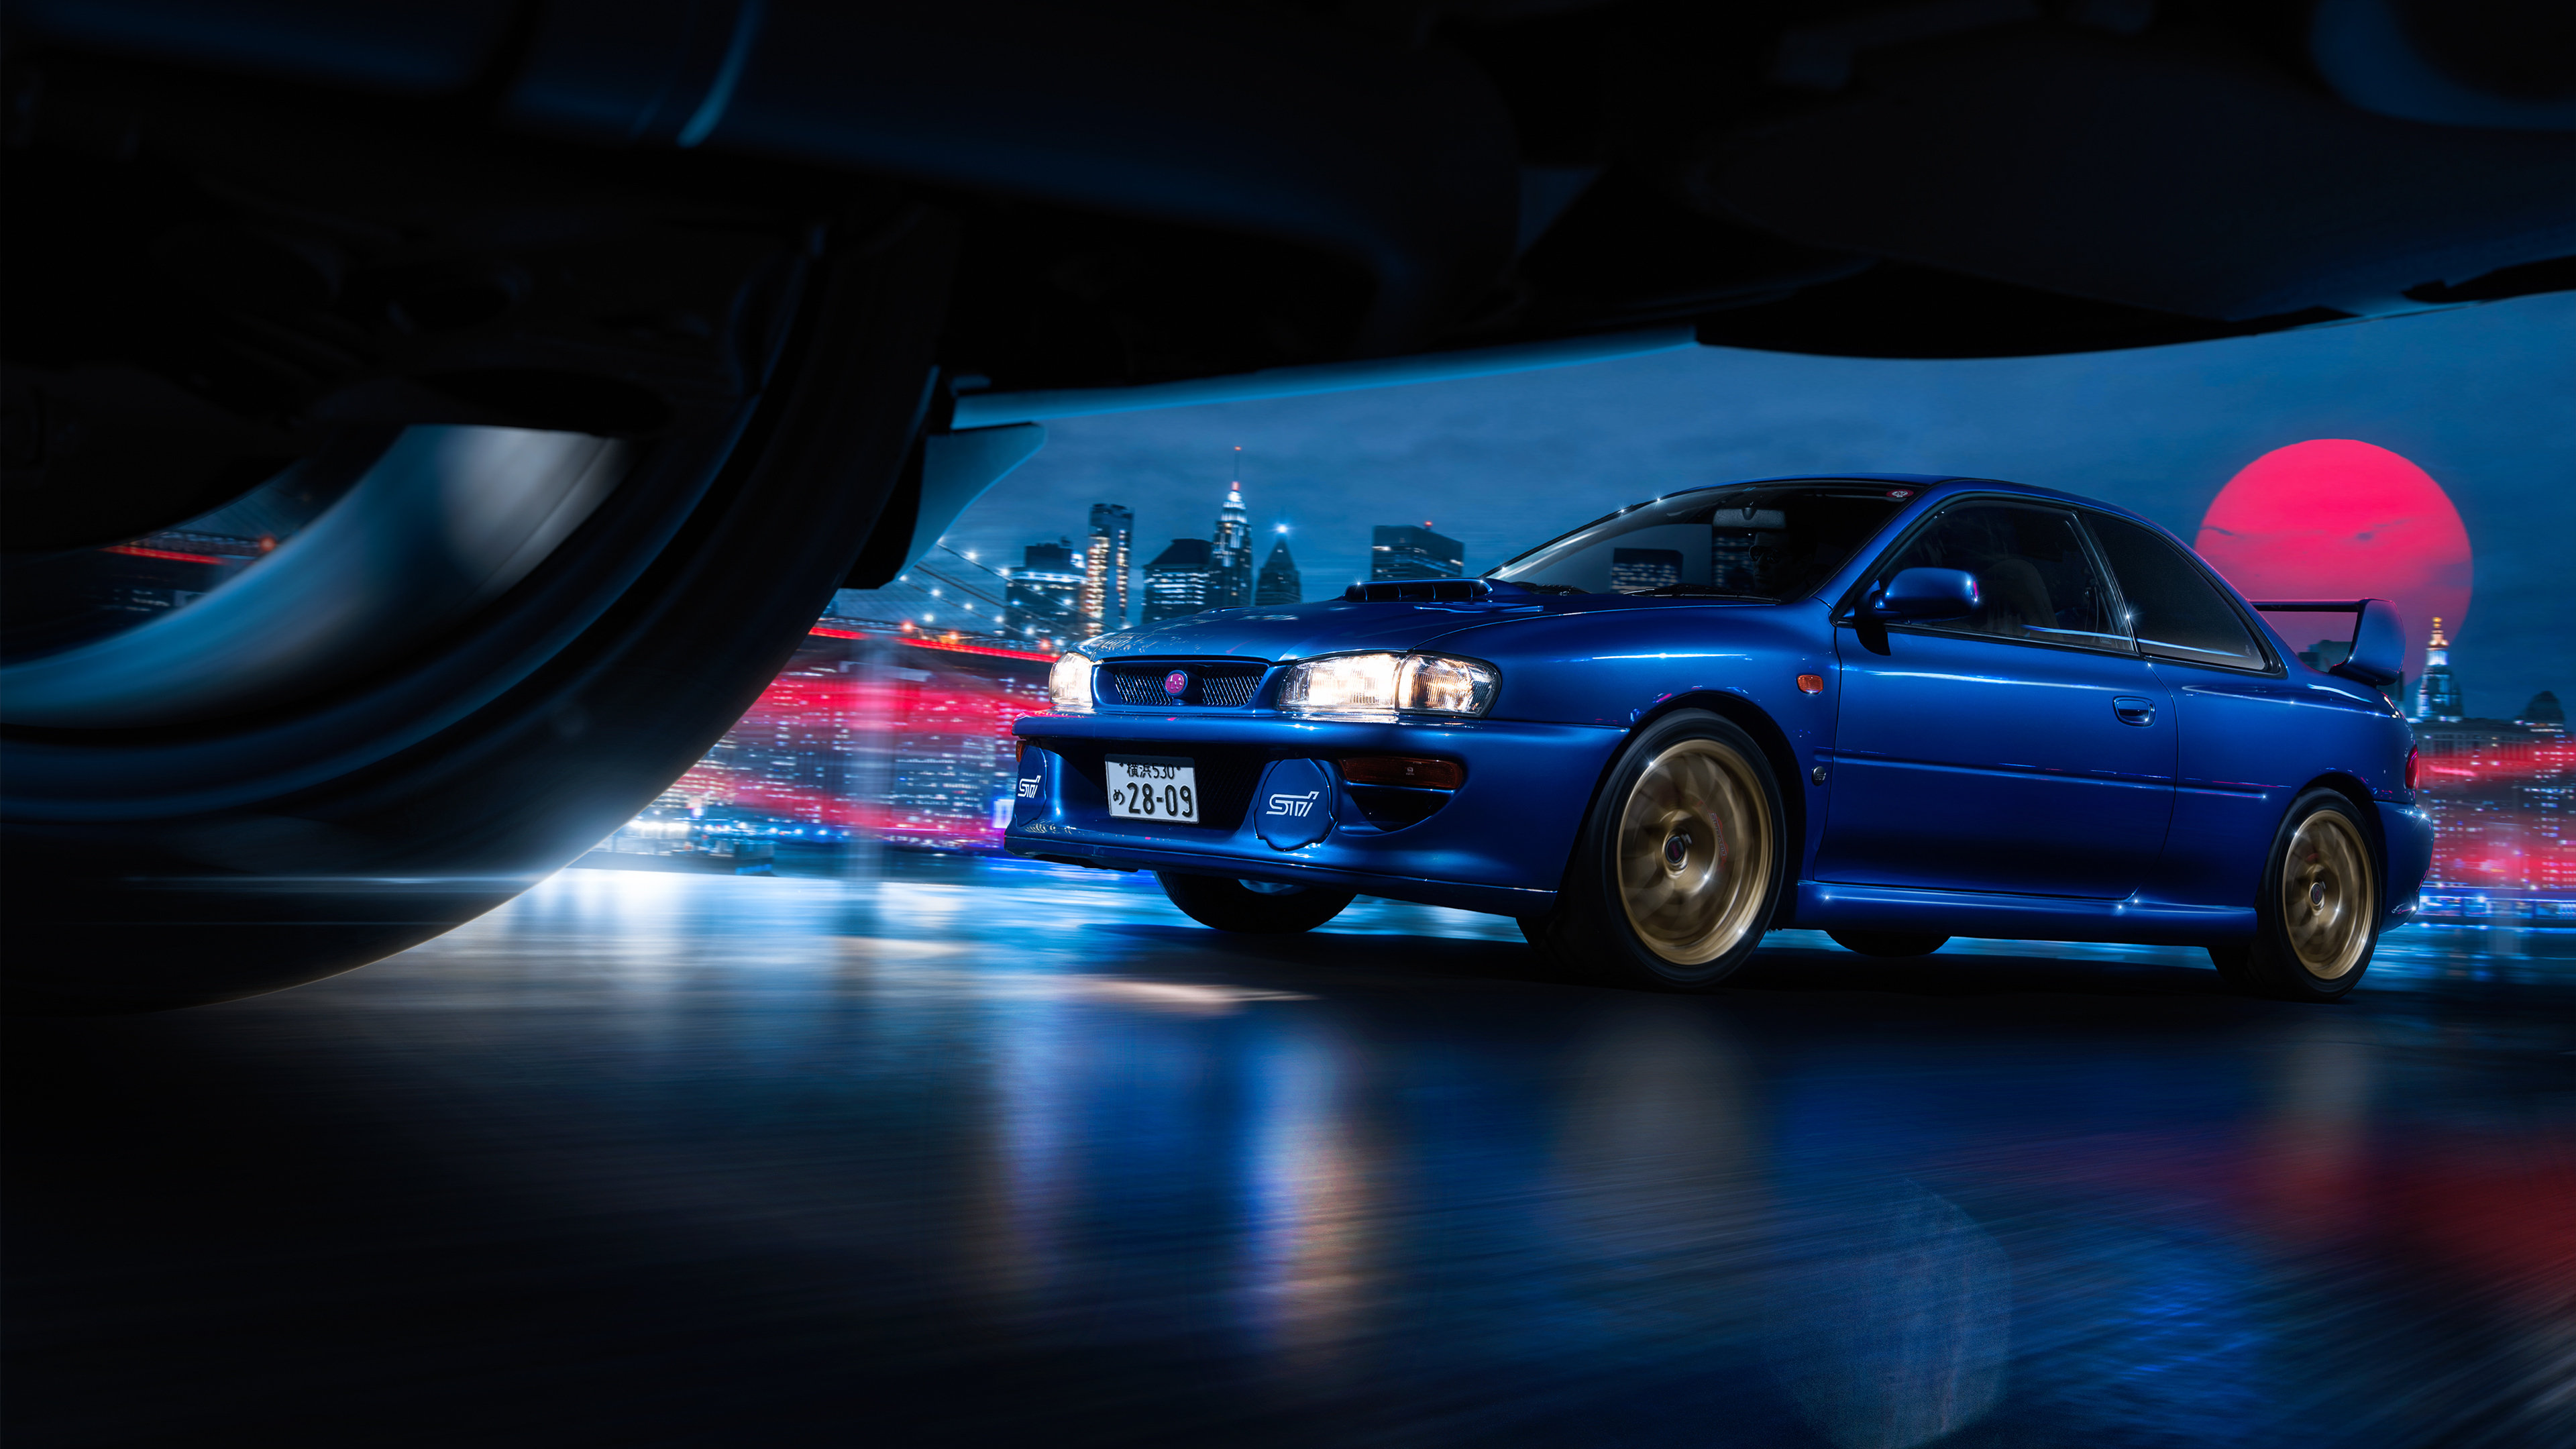 3840x2160 Subaru Impreza 22B, HD Cars, 4k Wallpapers, Images, Backgrounds, Photos and Pictures